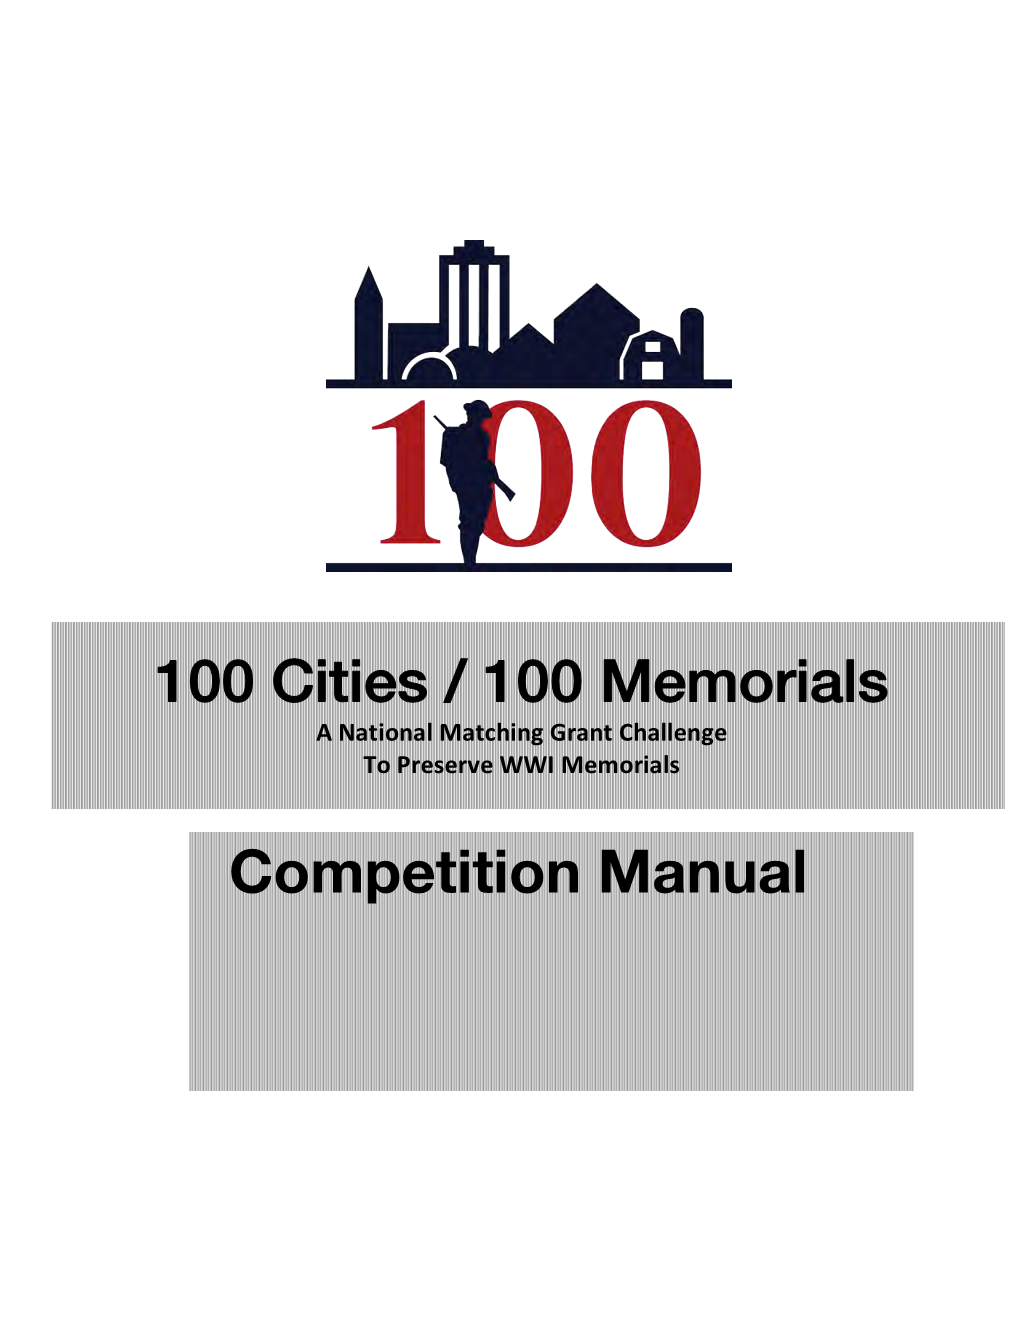 100 CITIES-Competition Manual-031617